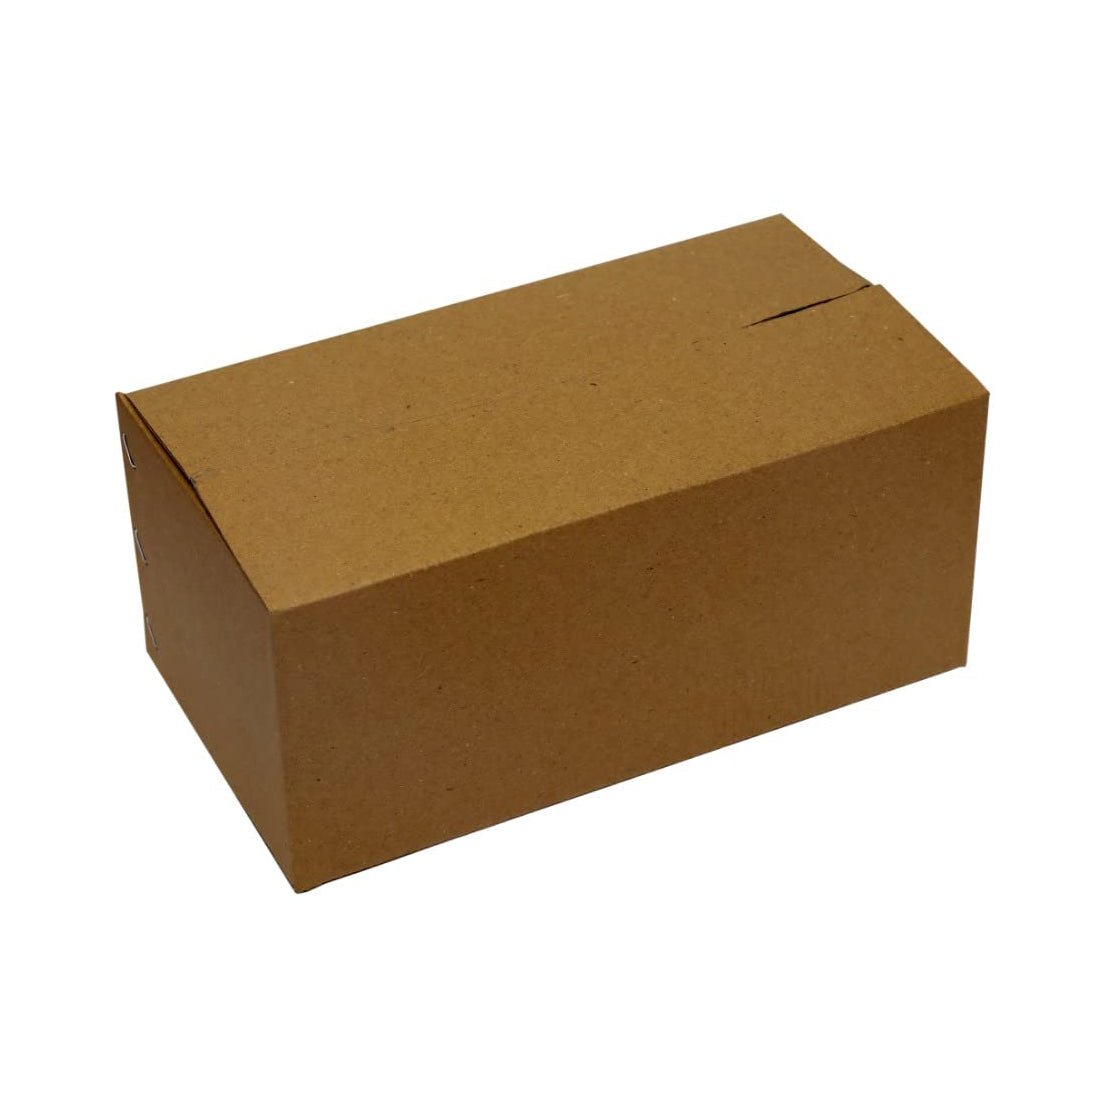 Brown Corrugated Cardboard Box for Packing (11 X 6 X 5 inches) - Pack of 25 Boxes